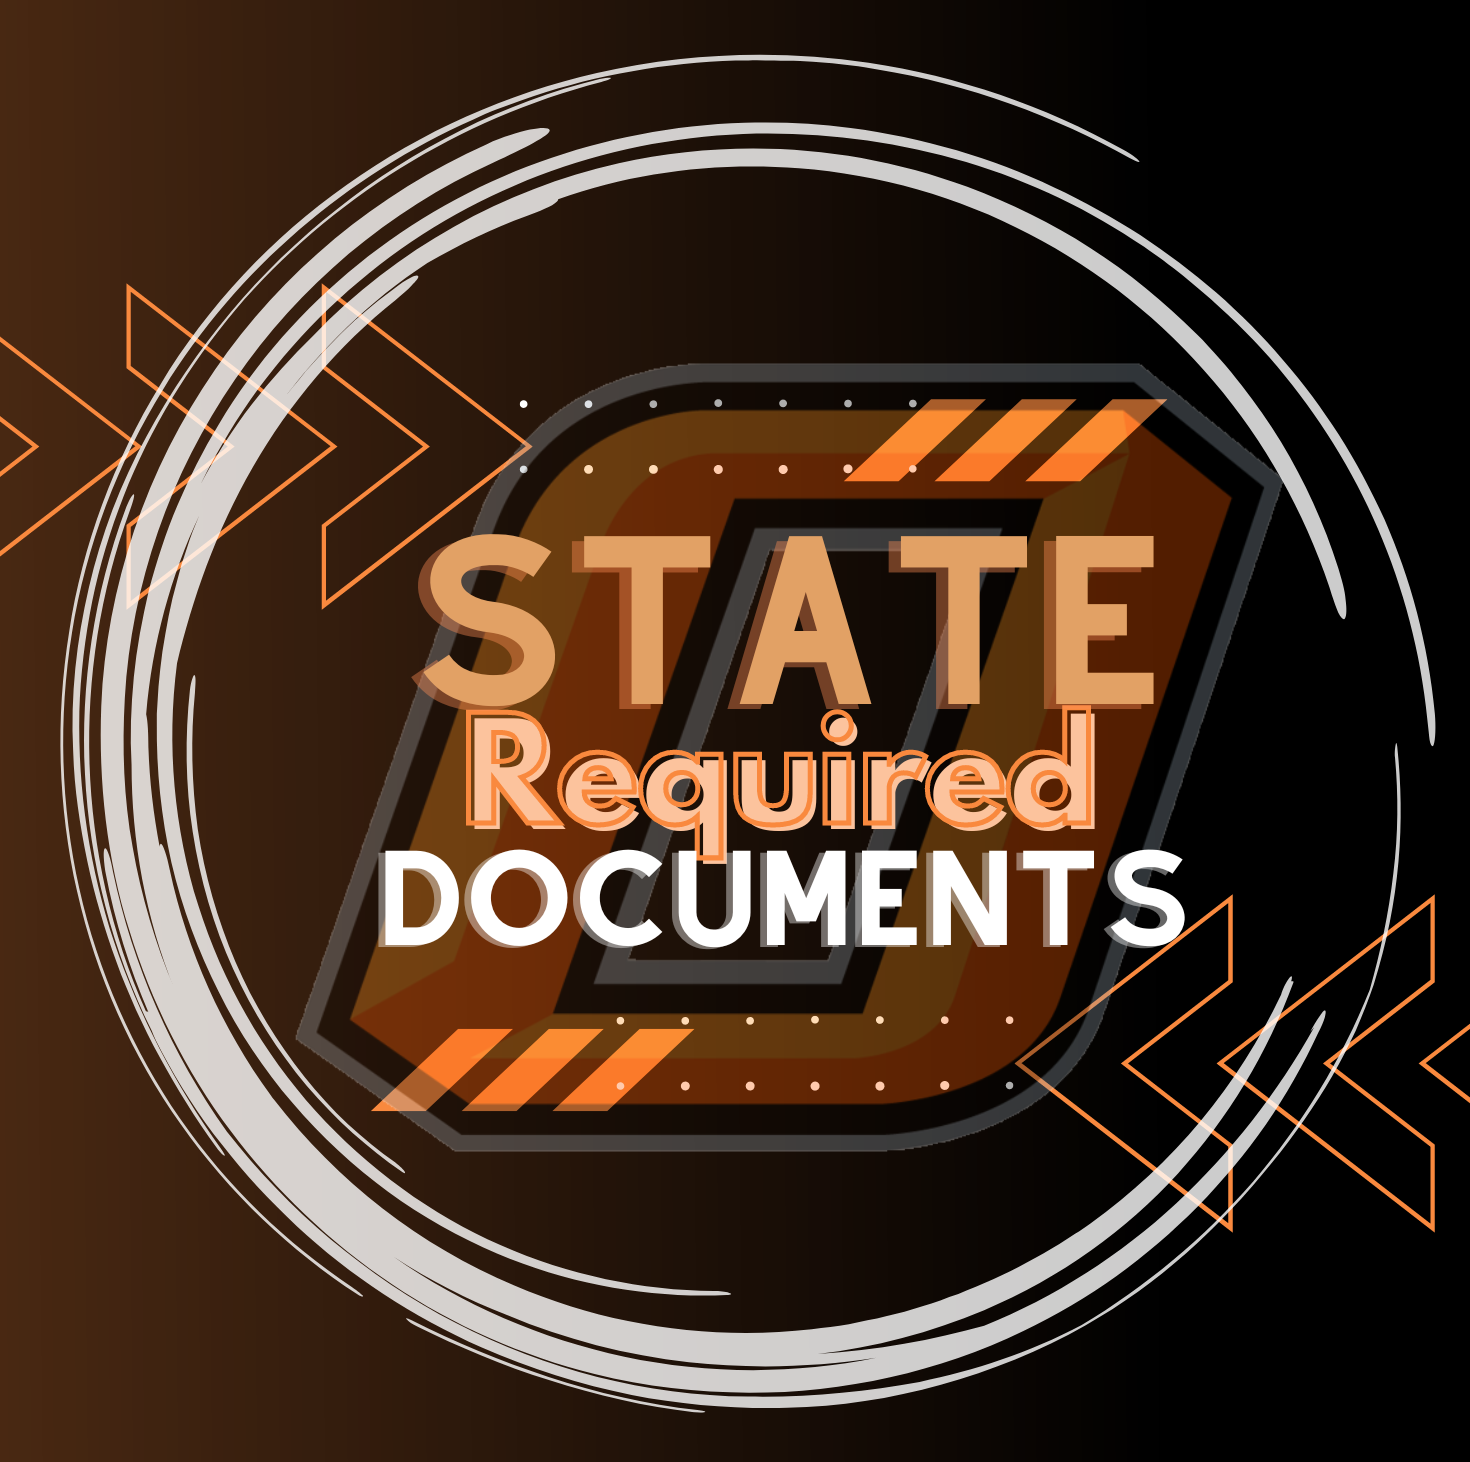 State Requirement Documents